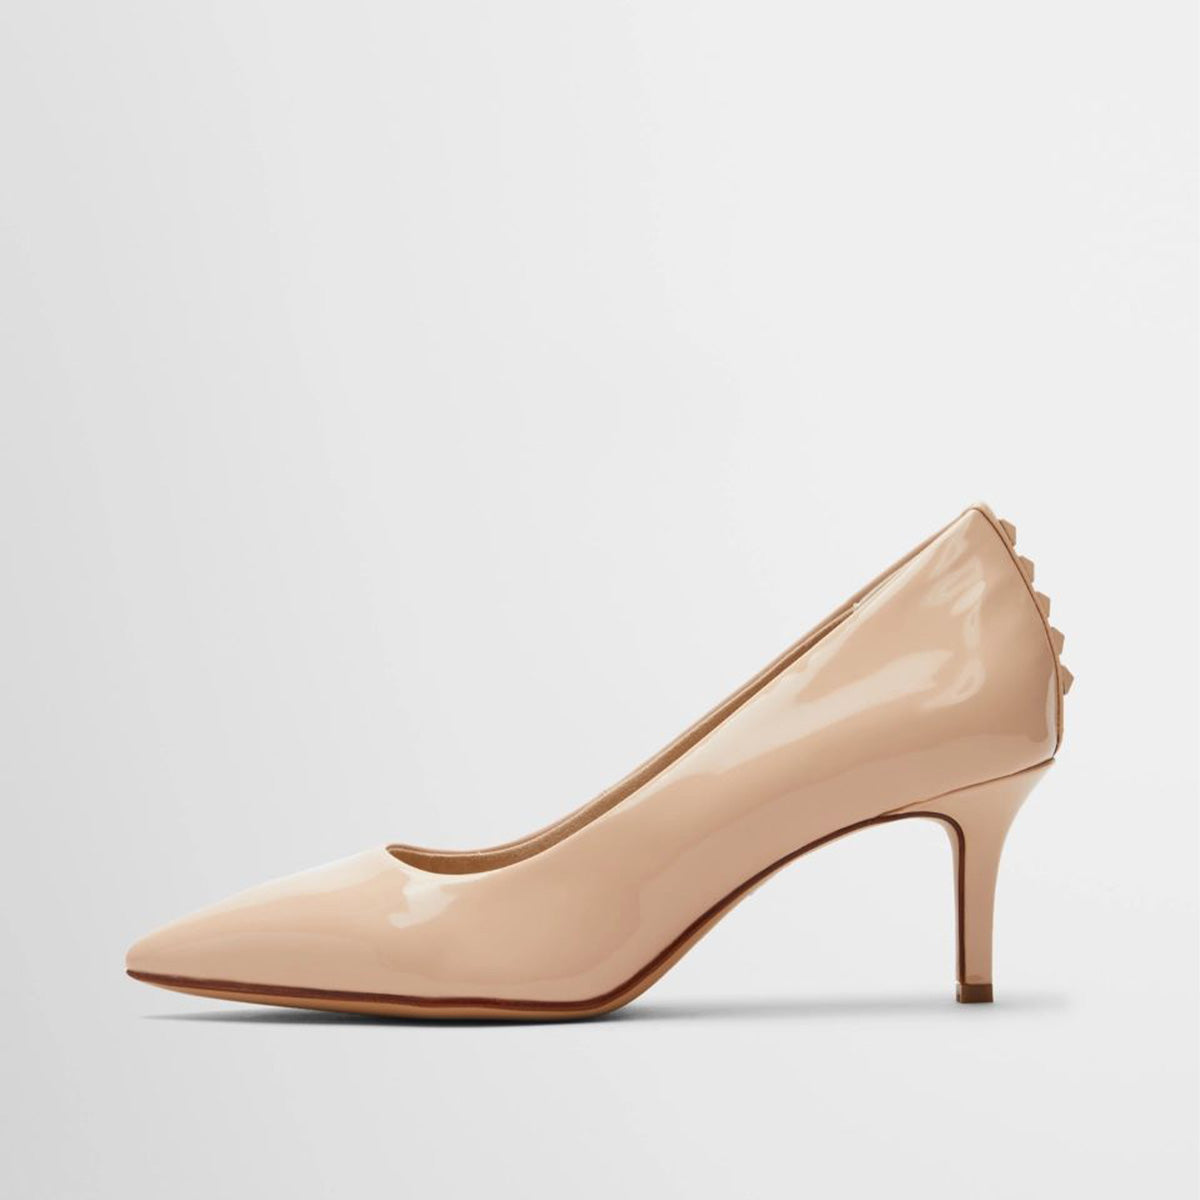 Sophisticated Classy Nude Heels with Studs